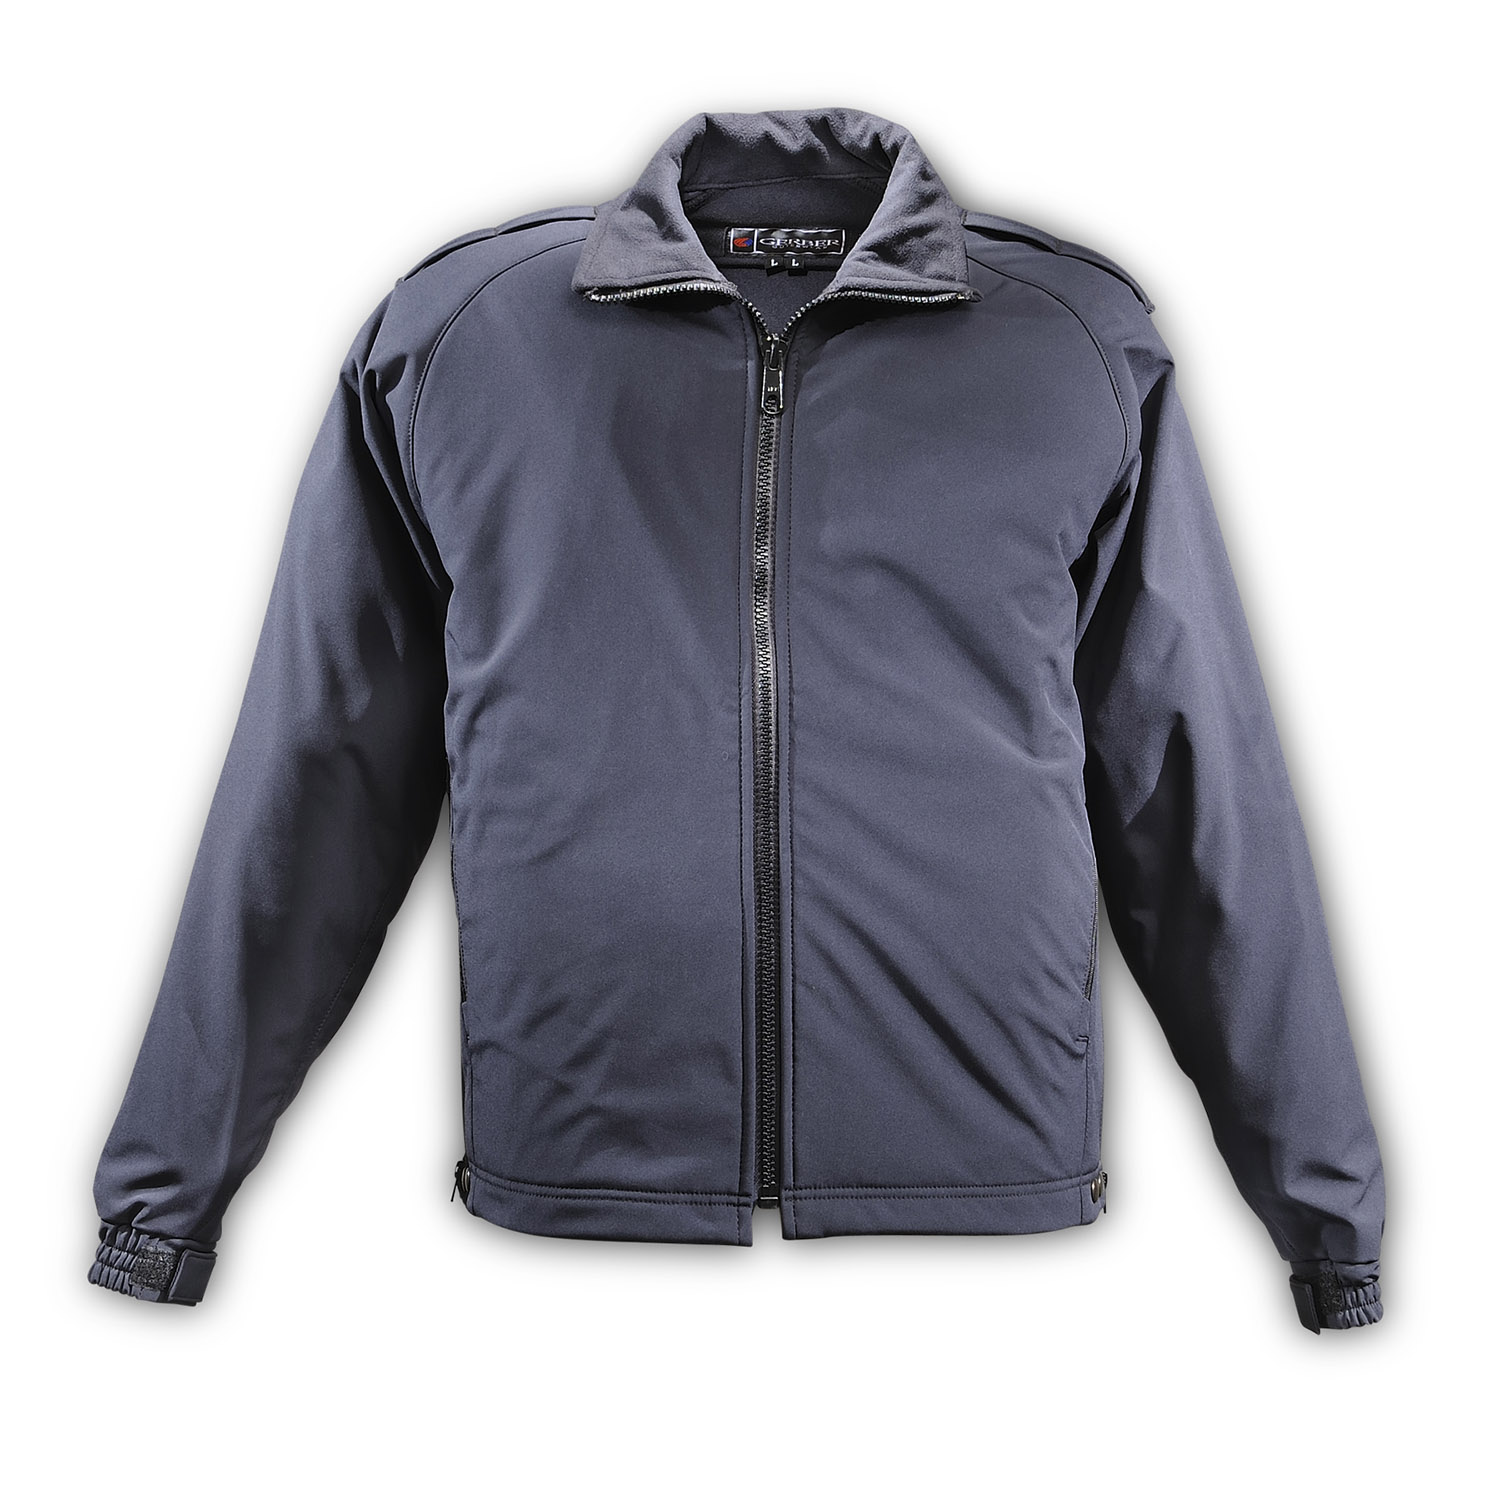 Gerber Outerwear Eclipse SX Navy Jacket with Warrior Softshe